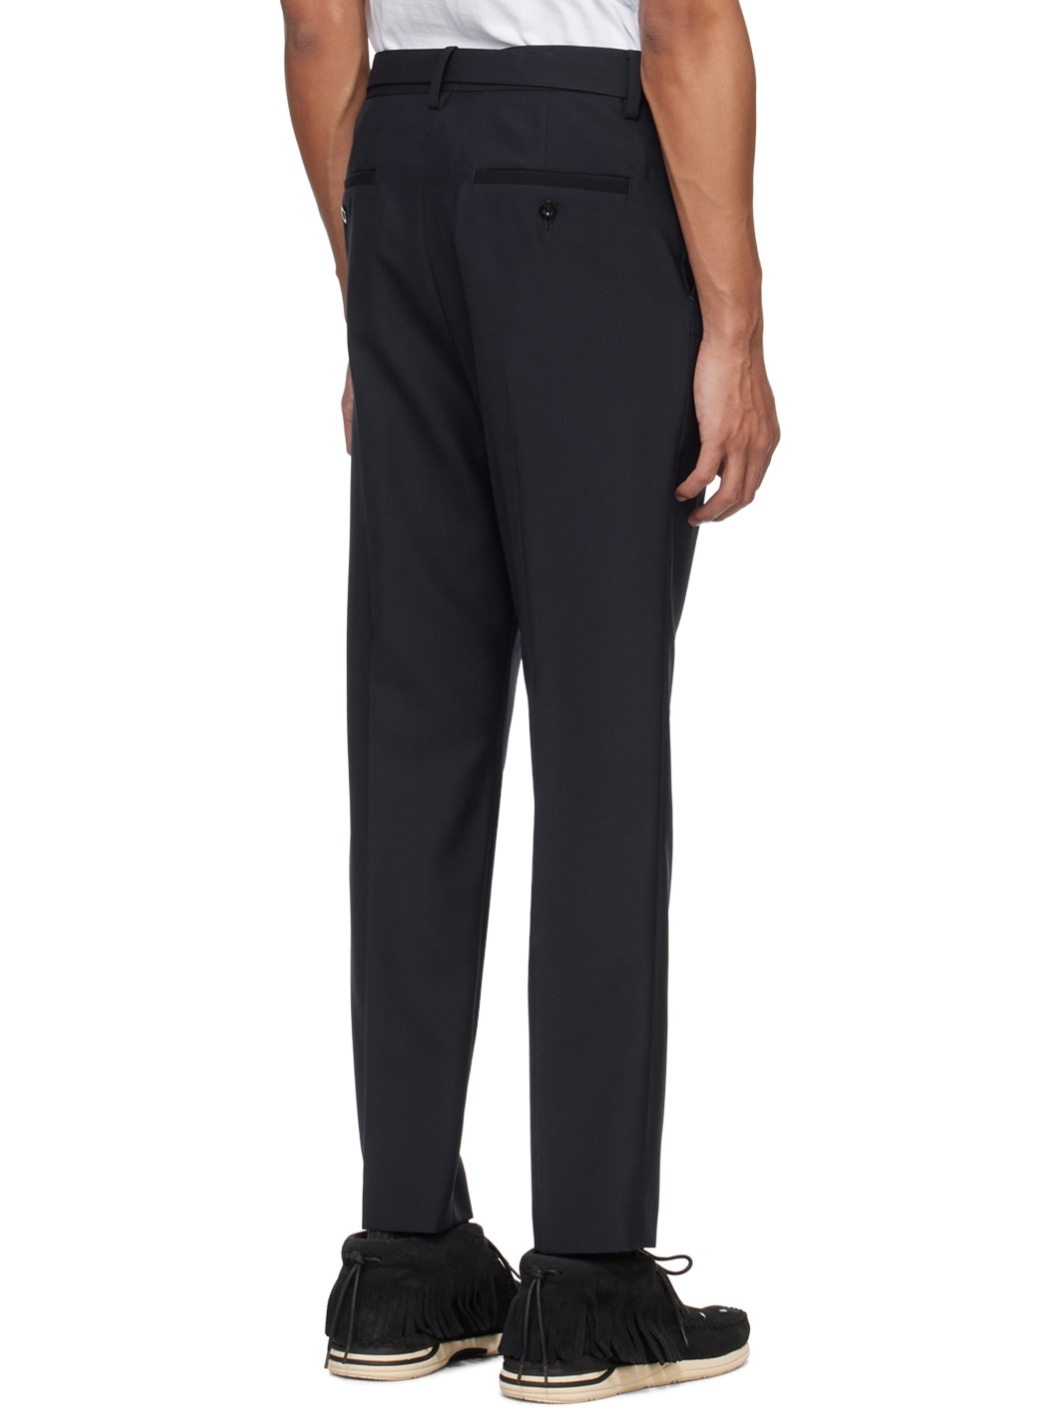 Navy Suiting Bonding Trousers - 3